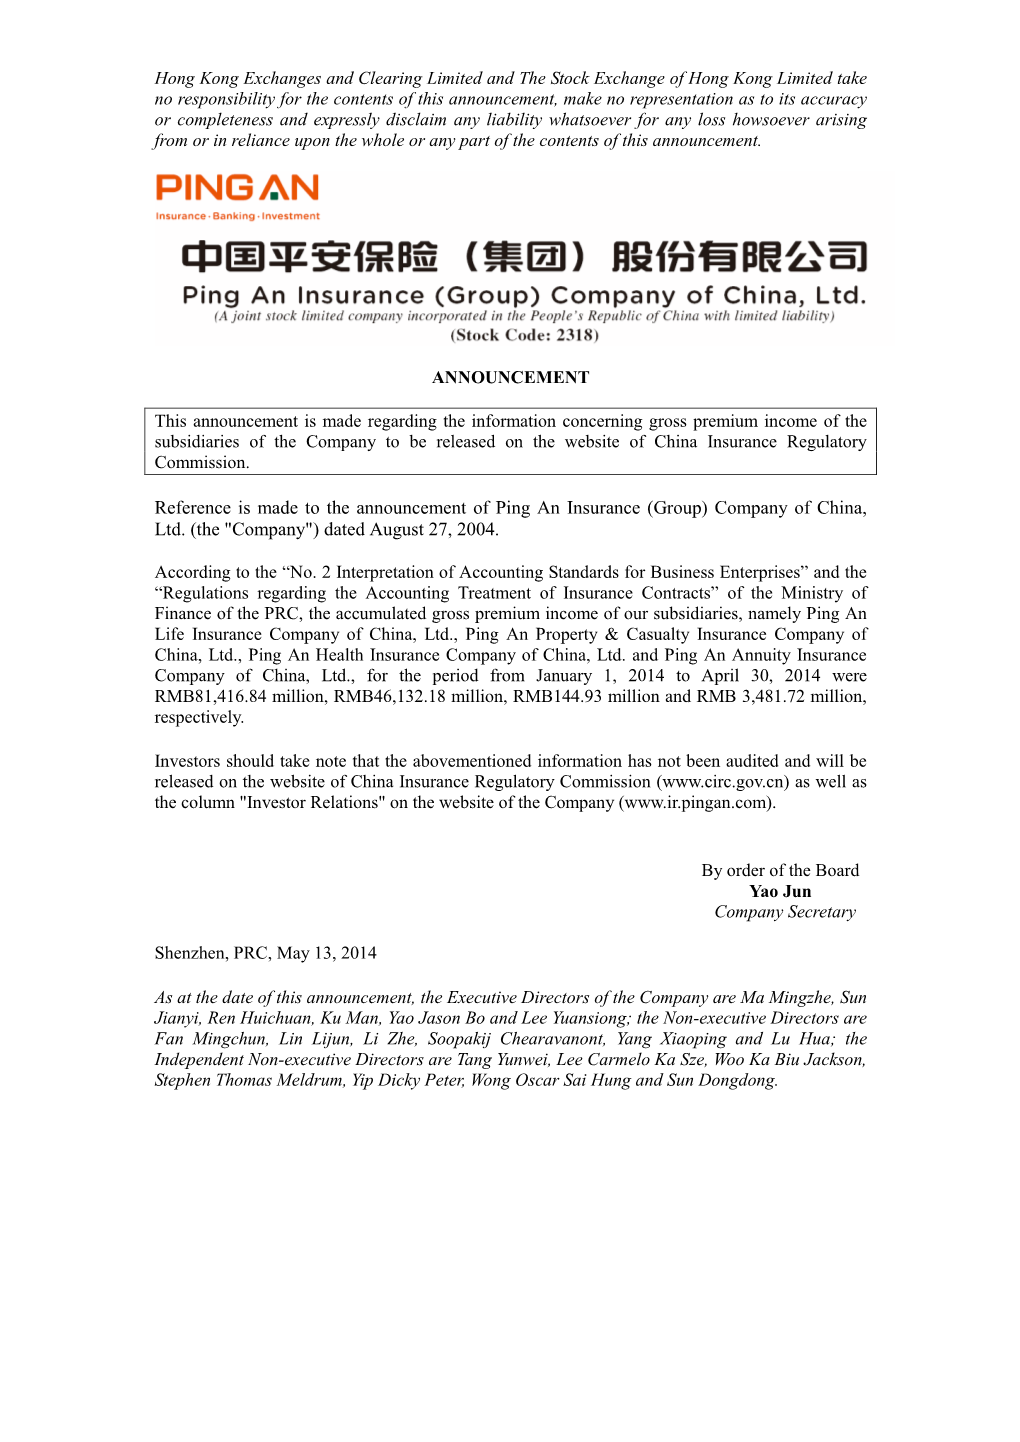 Reference Is Made to the Announcement of Ping an Insurance (Group) Company of China, Ltd